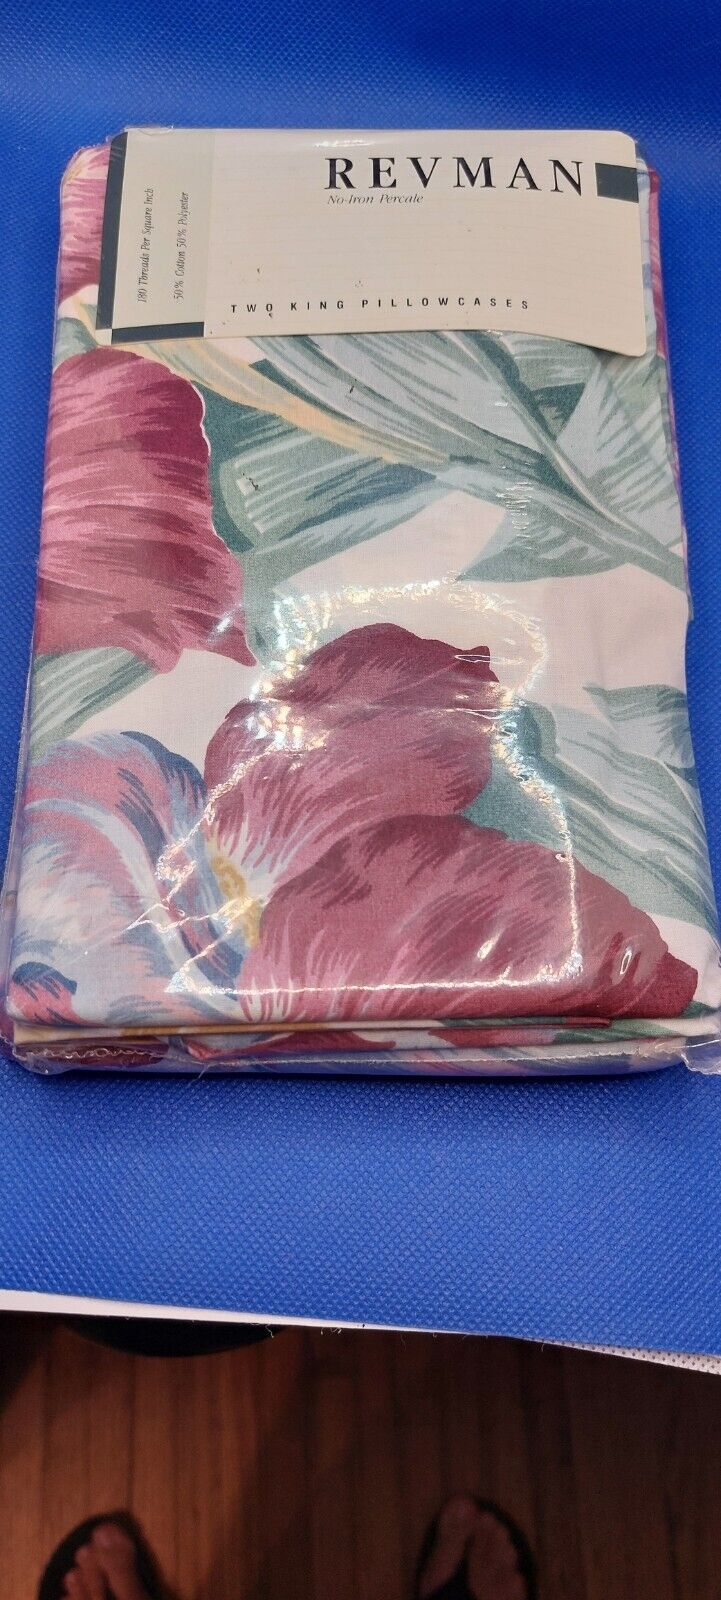 Vintage Revman King Pillowcases 180 Thread Count New In Package 